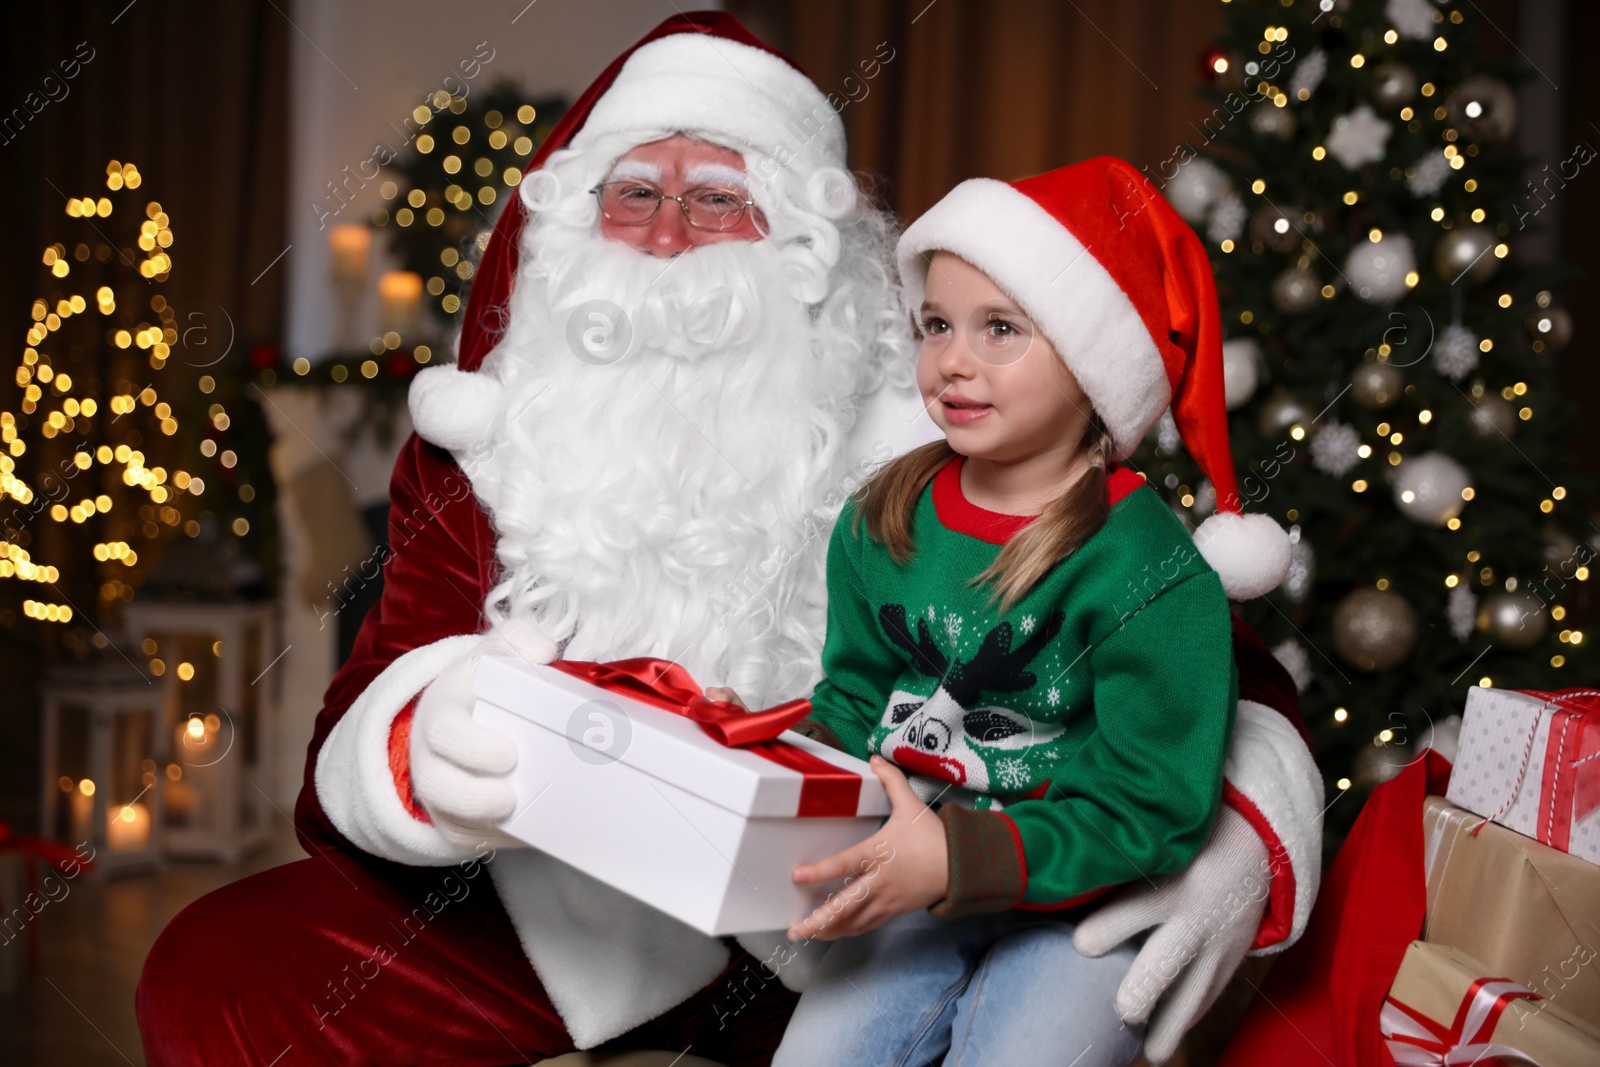 Photo of Santa Claus giving present to little girl in room decorated for Christmas